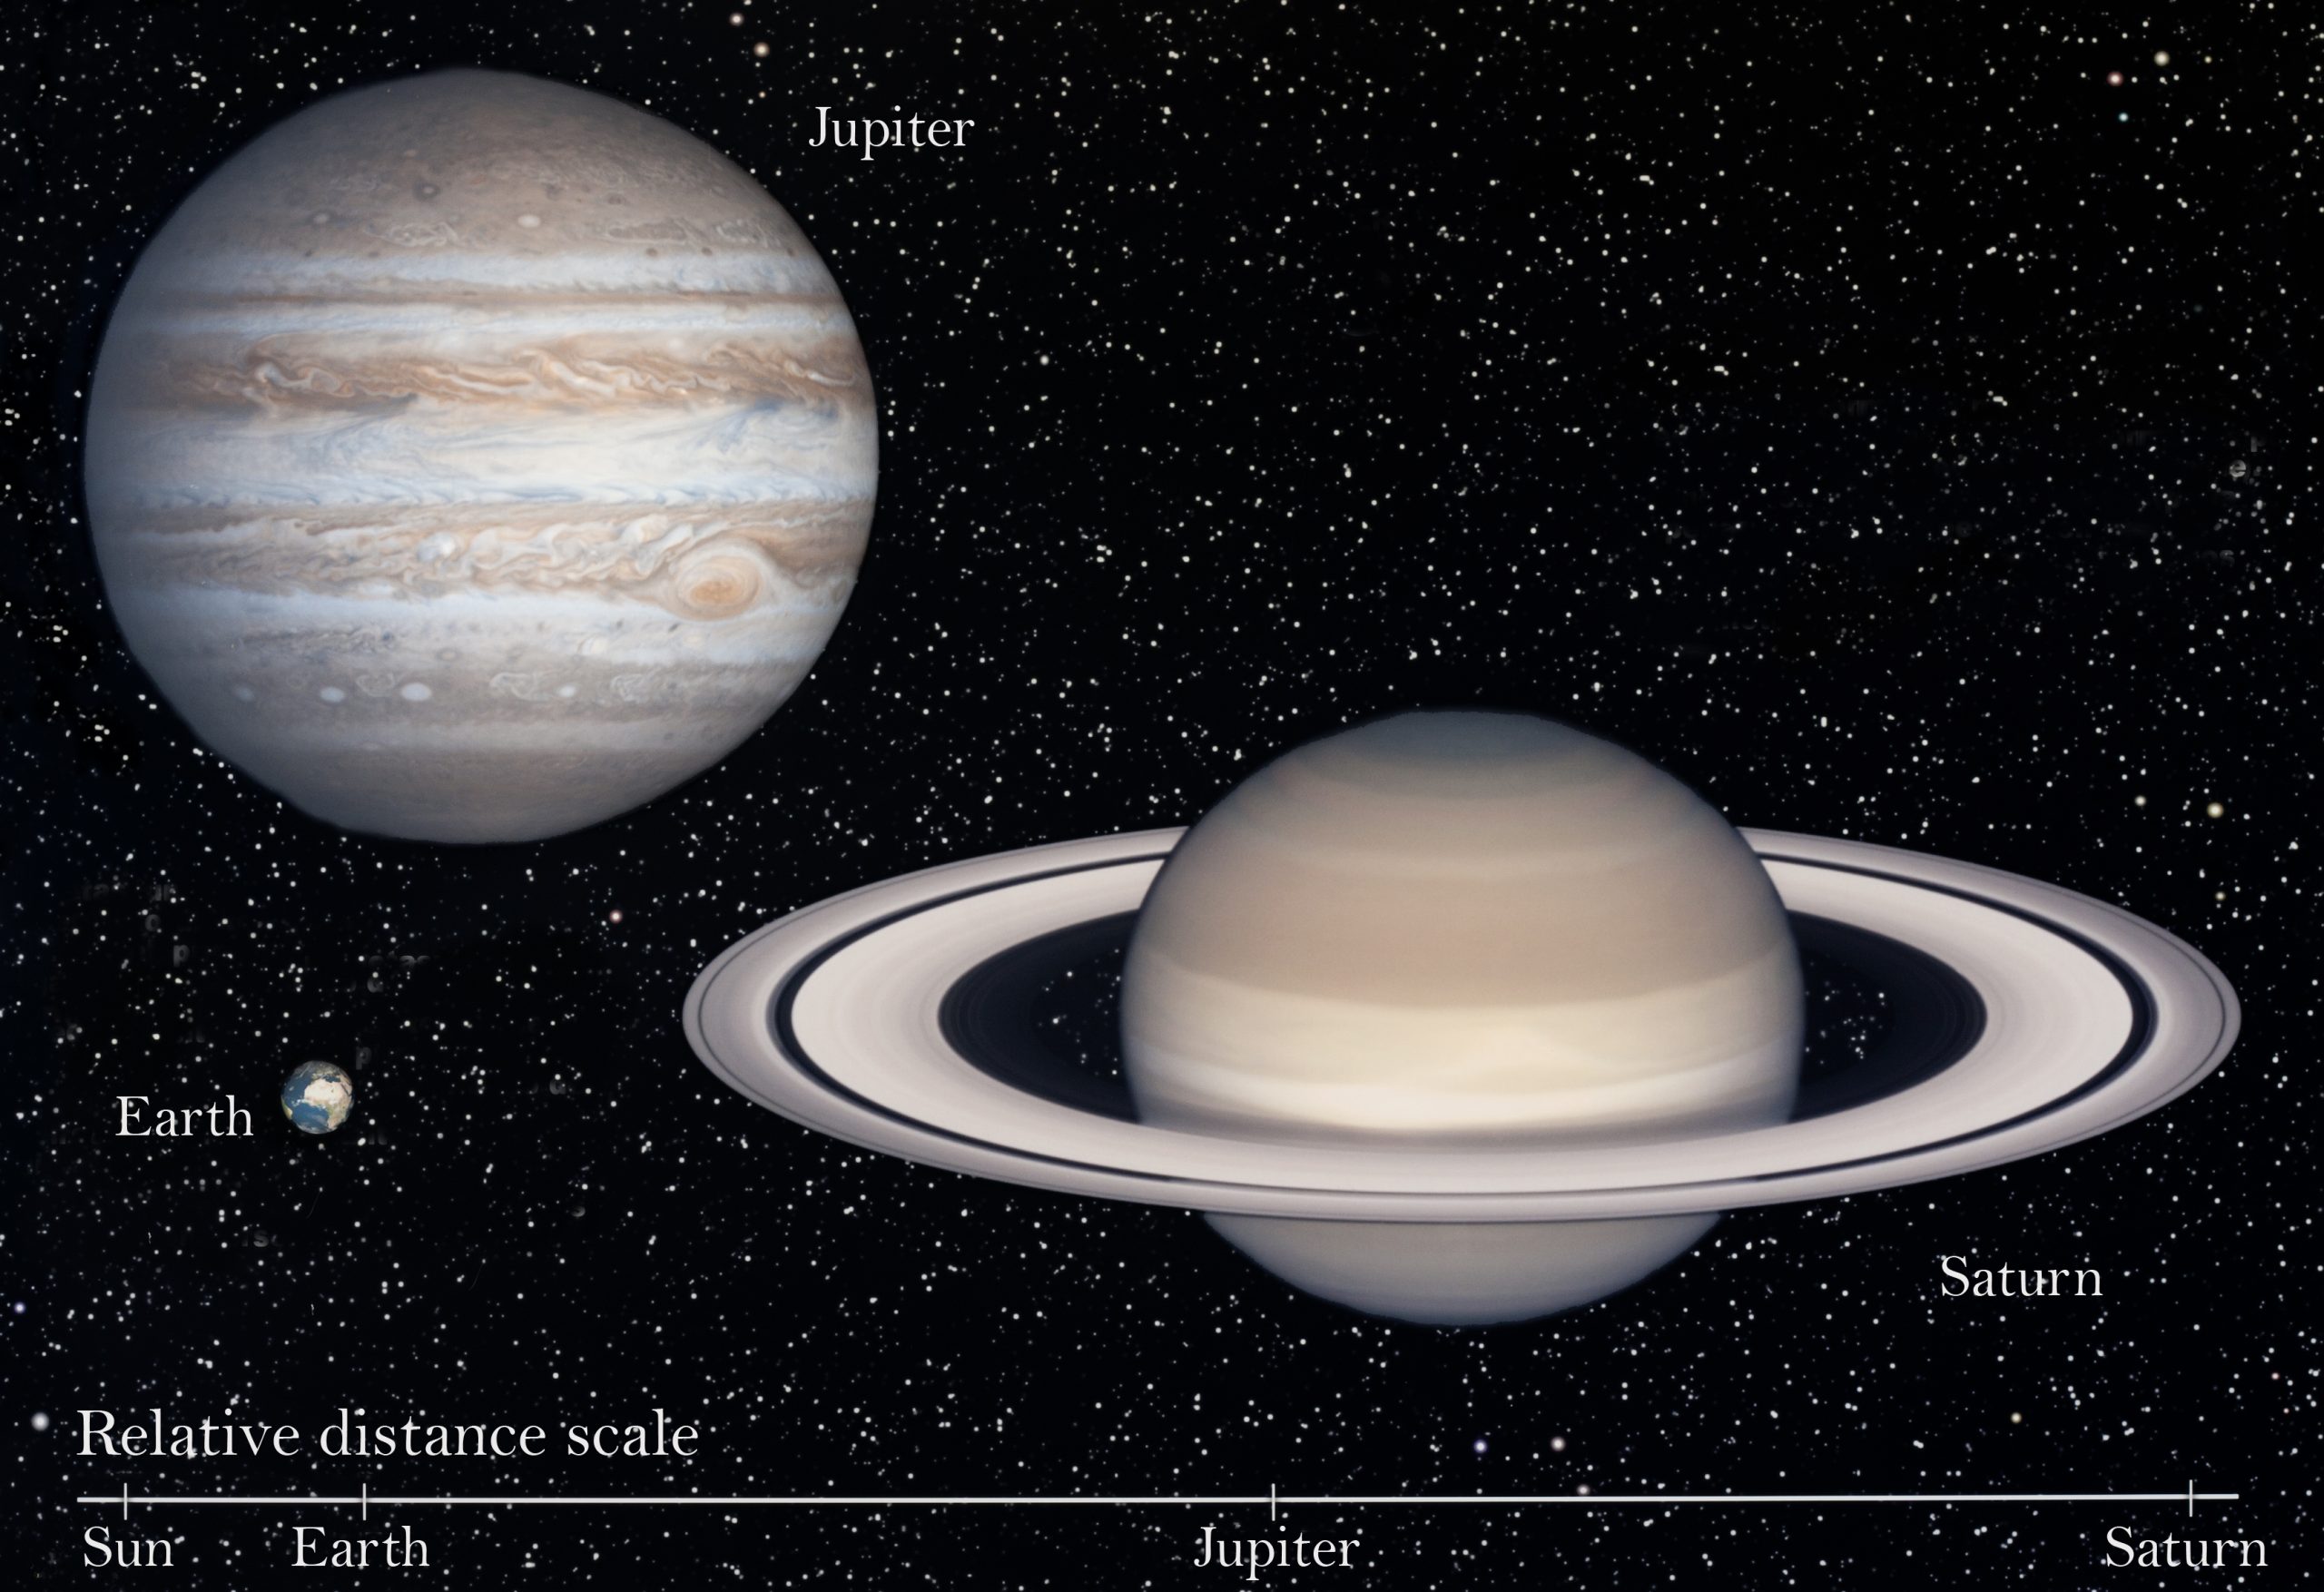 An artistic rendering of Jupiter, Saturn and the Earth to scale. Depositphotos.